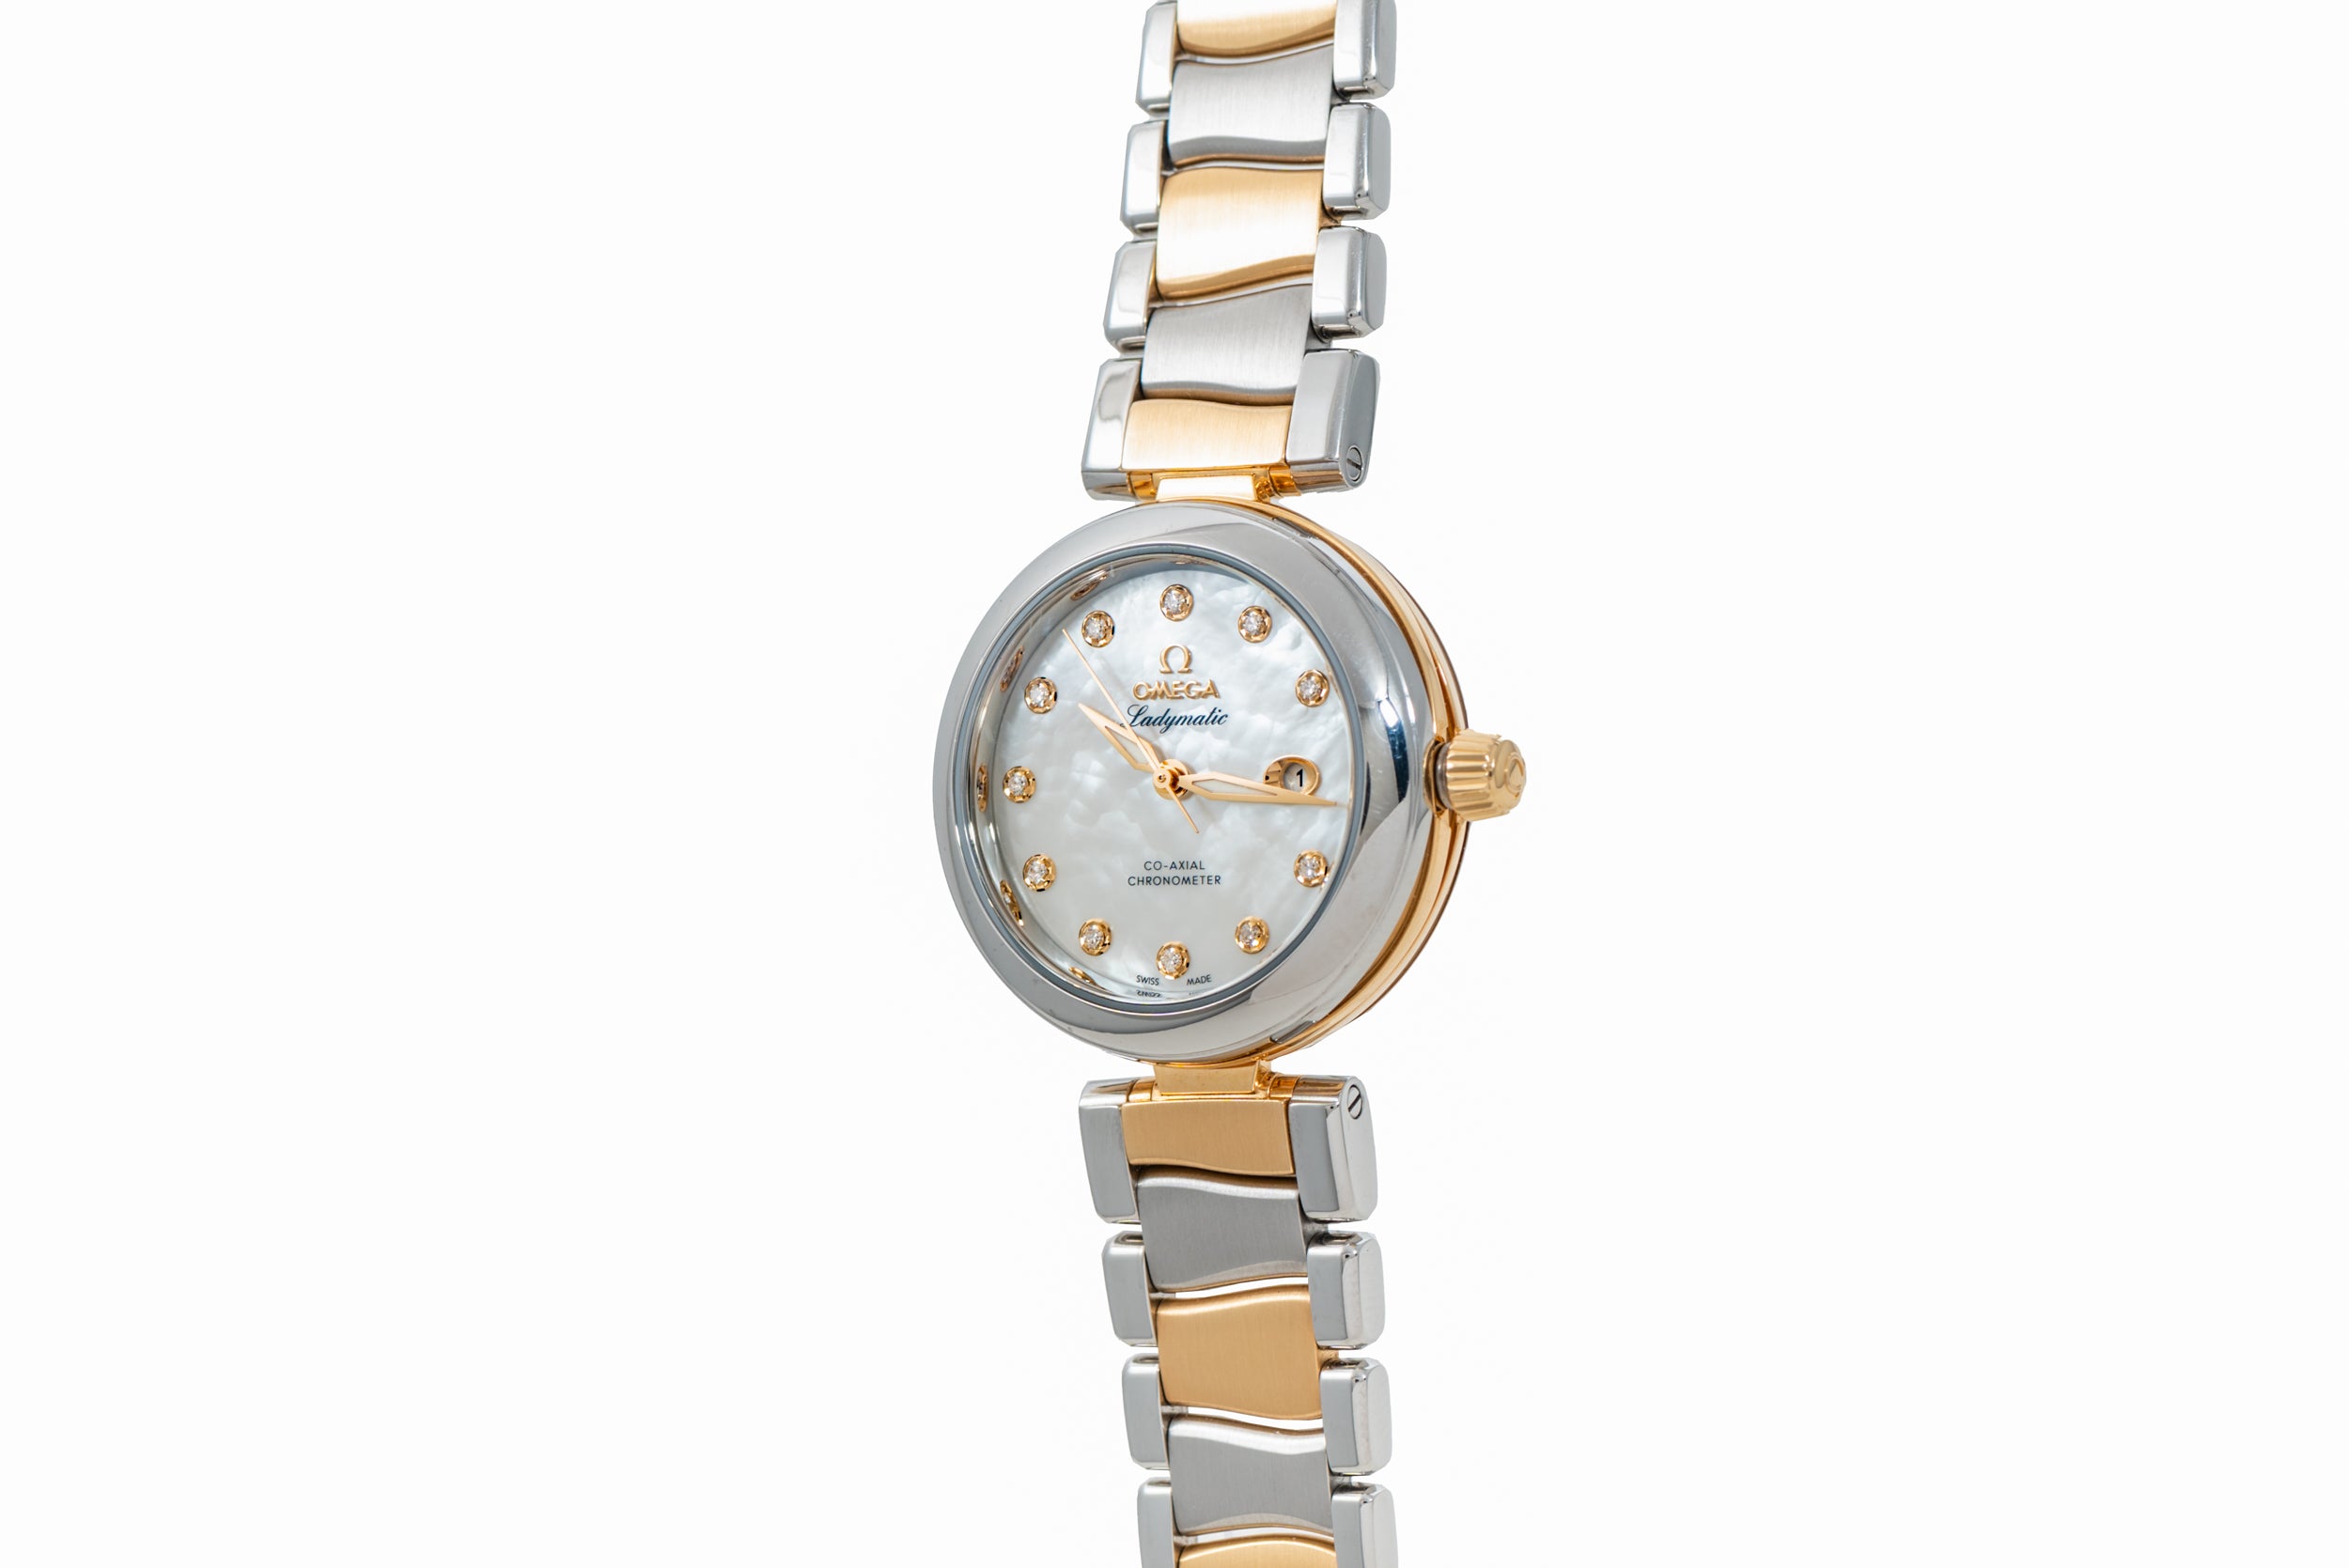 Amazon.com: Omega De Ville Ladymatic Automatic Diamond Mother of Pearl  Ladies Watch 425.33.34.20.55.001 : Clothing, Shoes & Jewelry